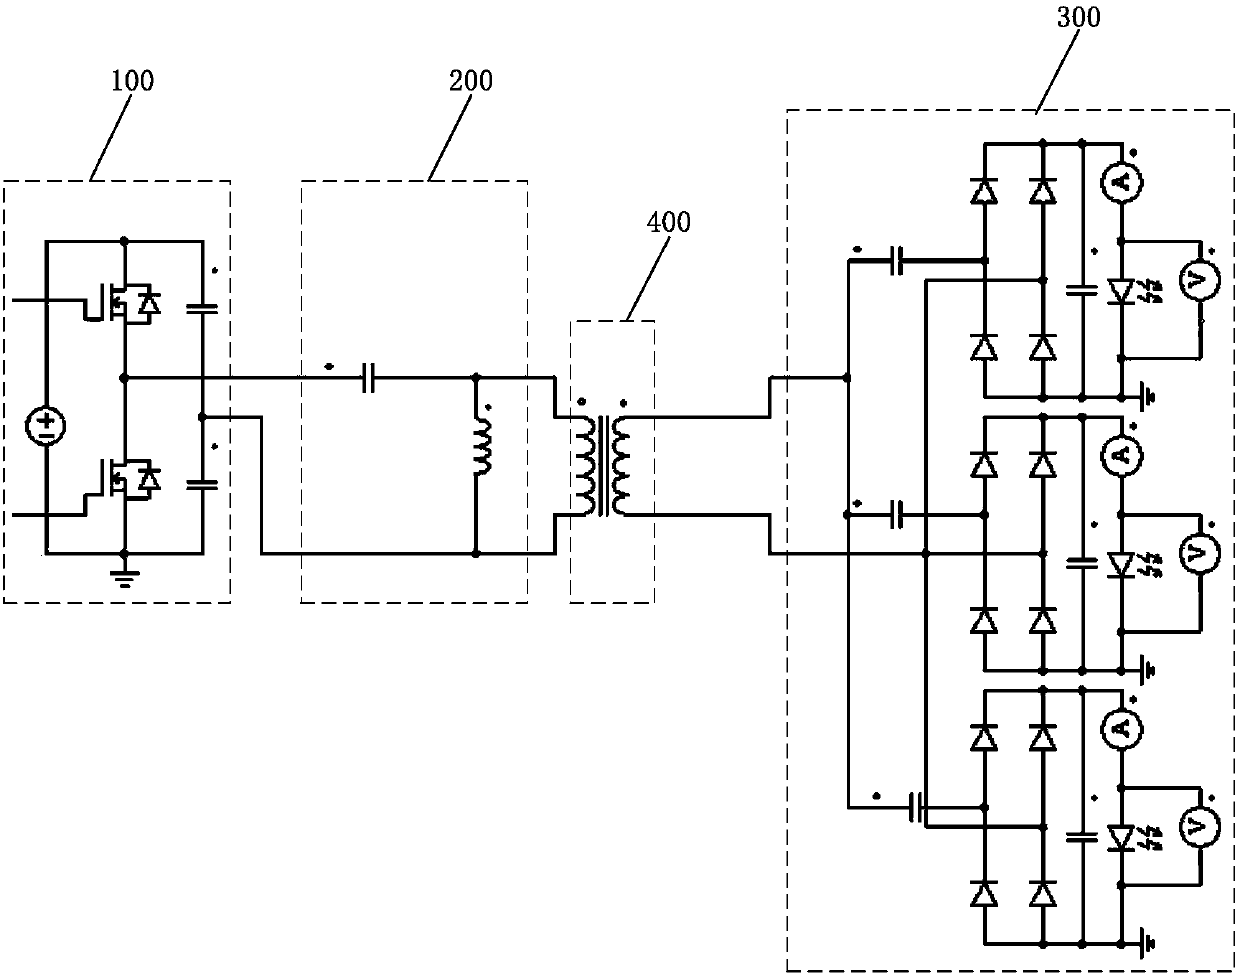 A control method for a resonant led current sharing circuit